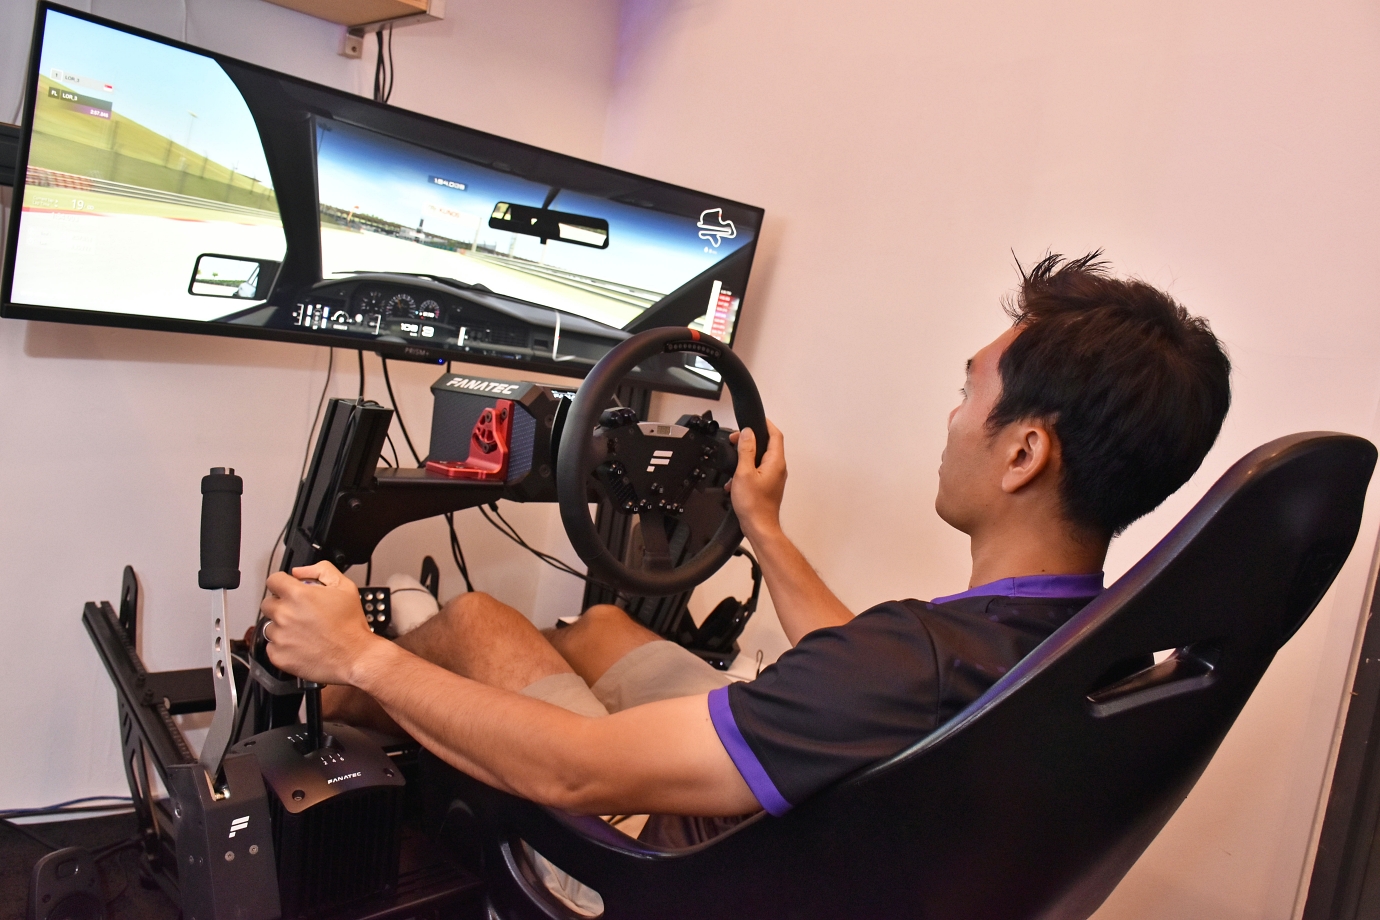 lor, legion of racers, 99bends, melvin moh, sim race, sim racing, racing sim, motorsports, racing sim, sim racing, e-sports, tgs talks to melvin moh from the legion of racers